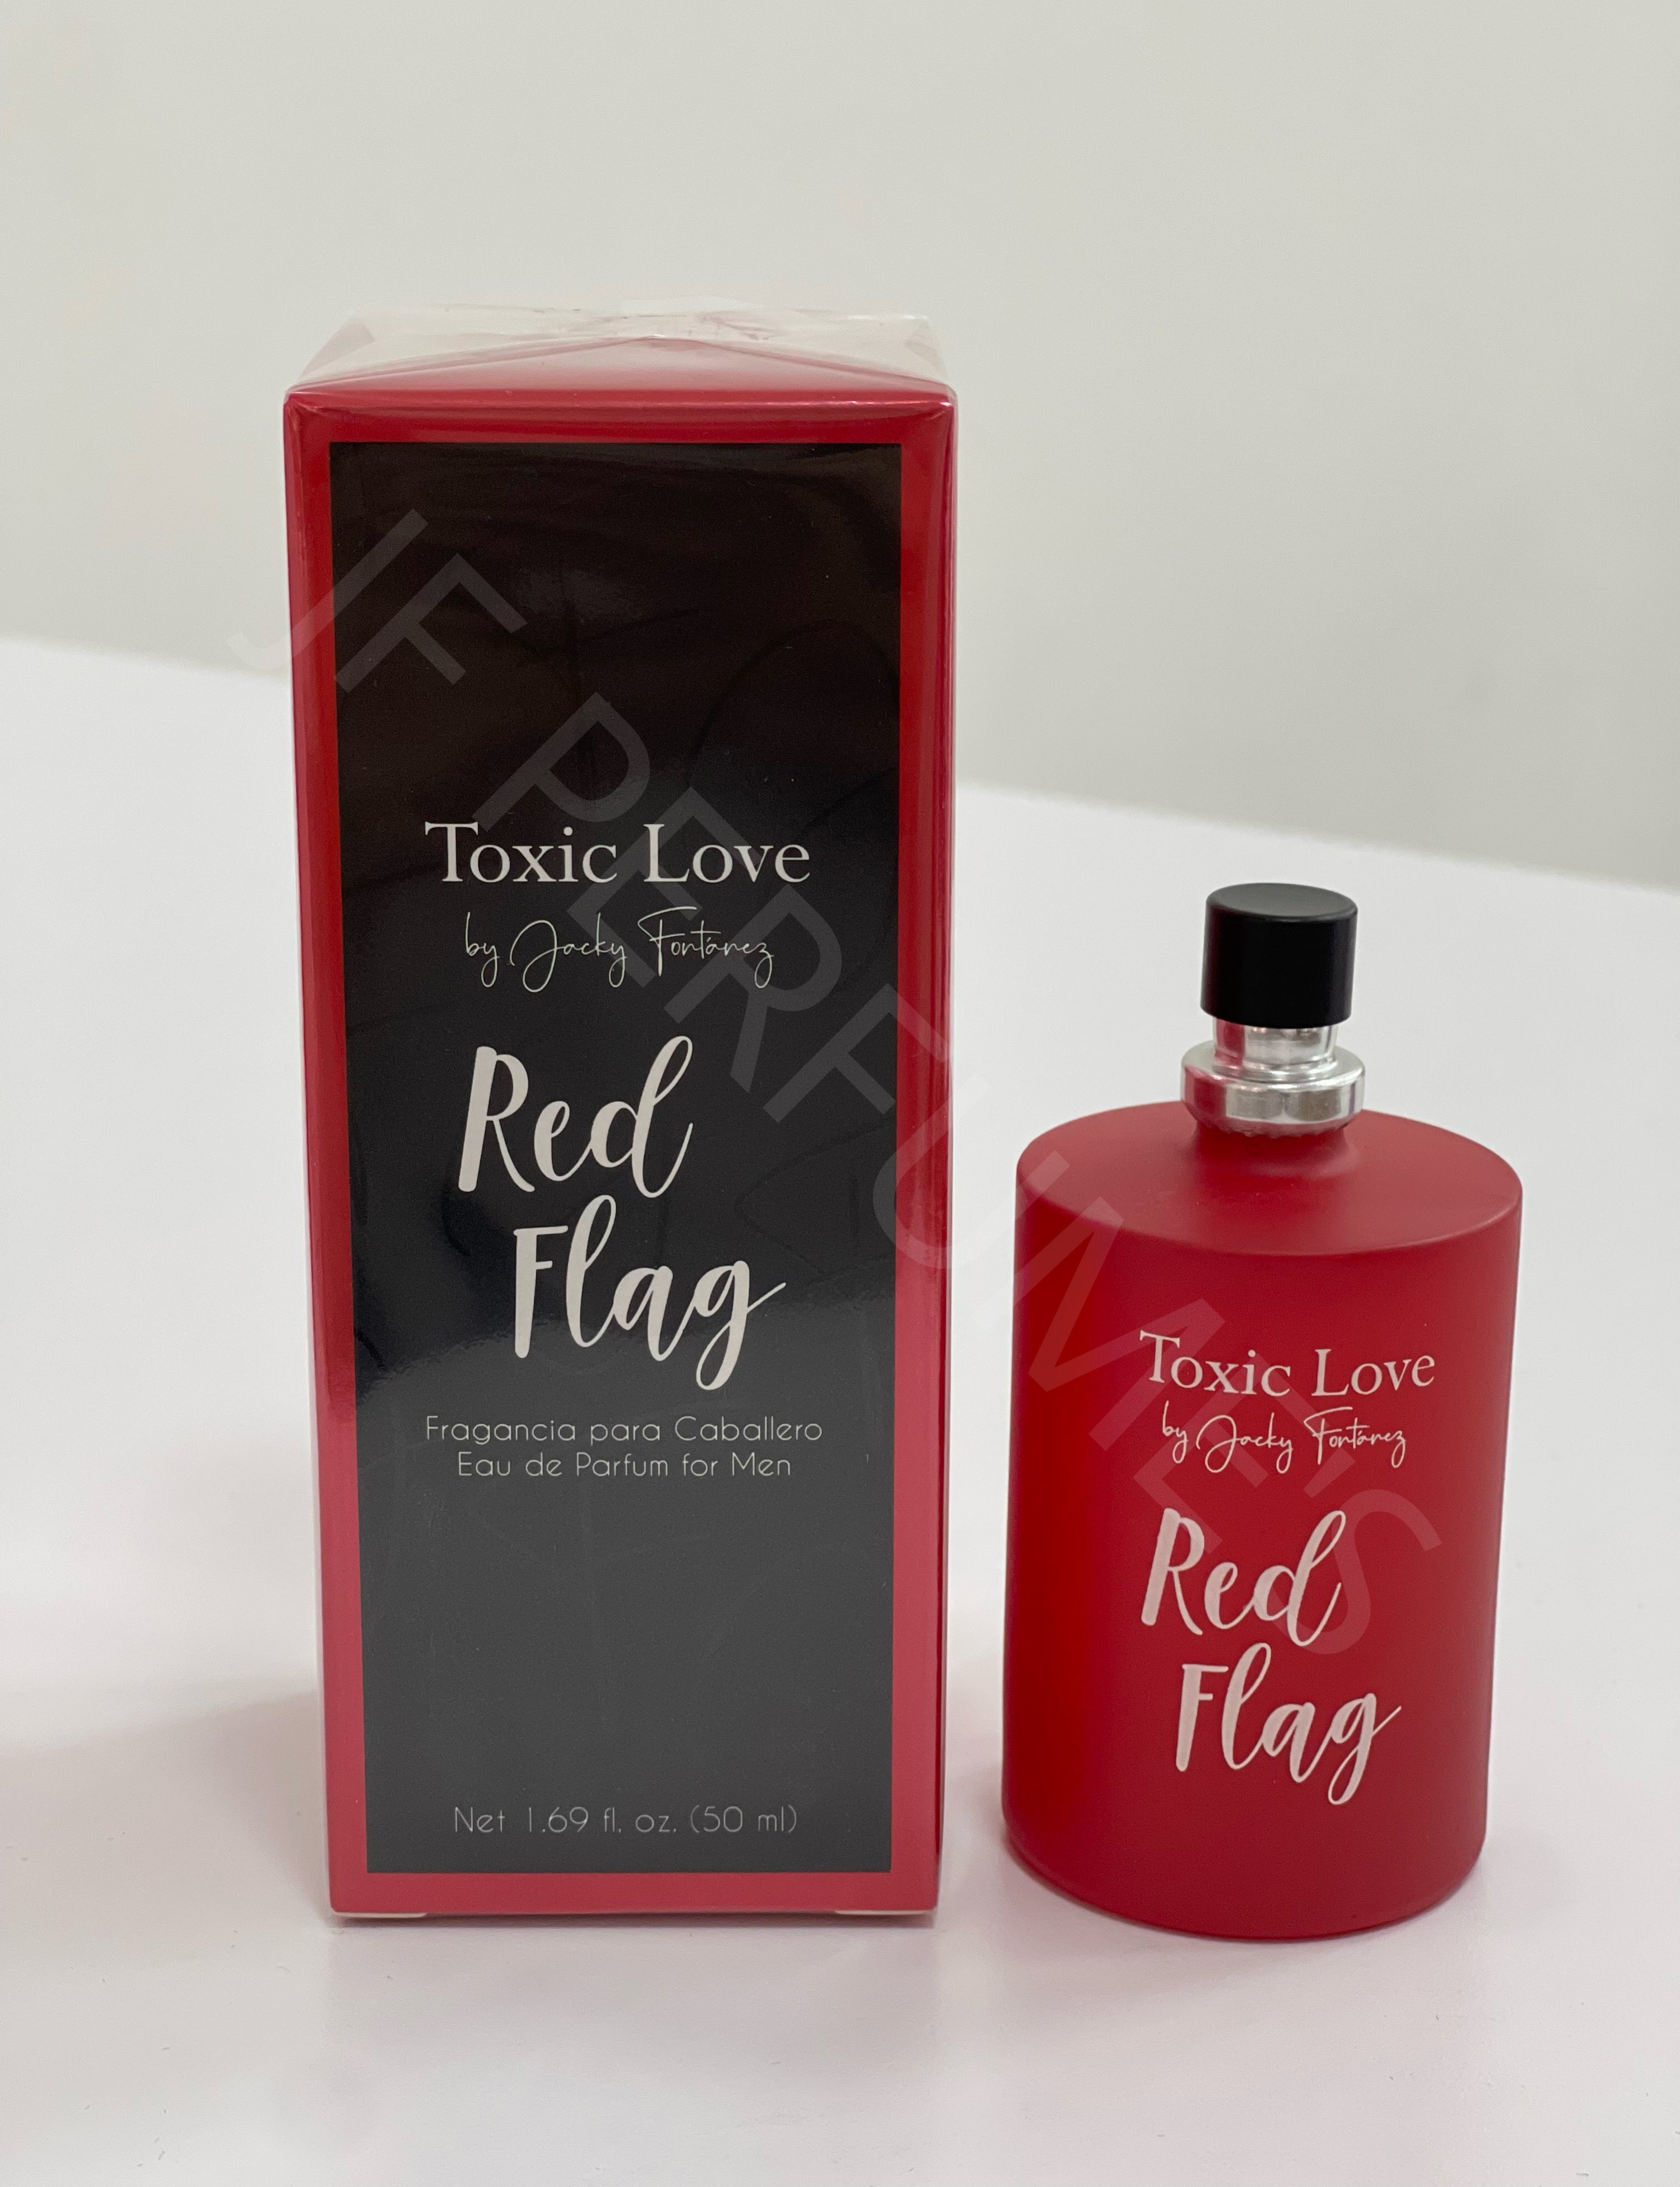 RED FLAG TOXIC LOVE BY JACKY FONTÁNEZ